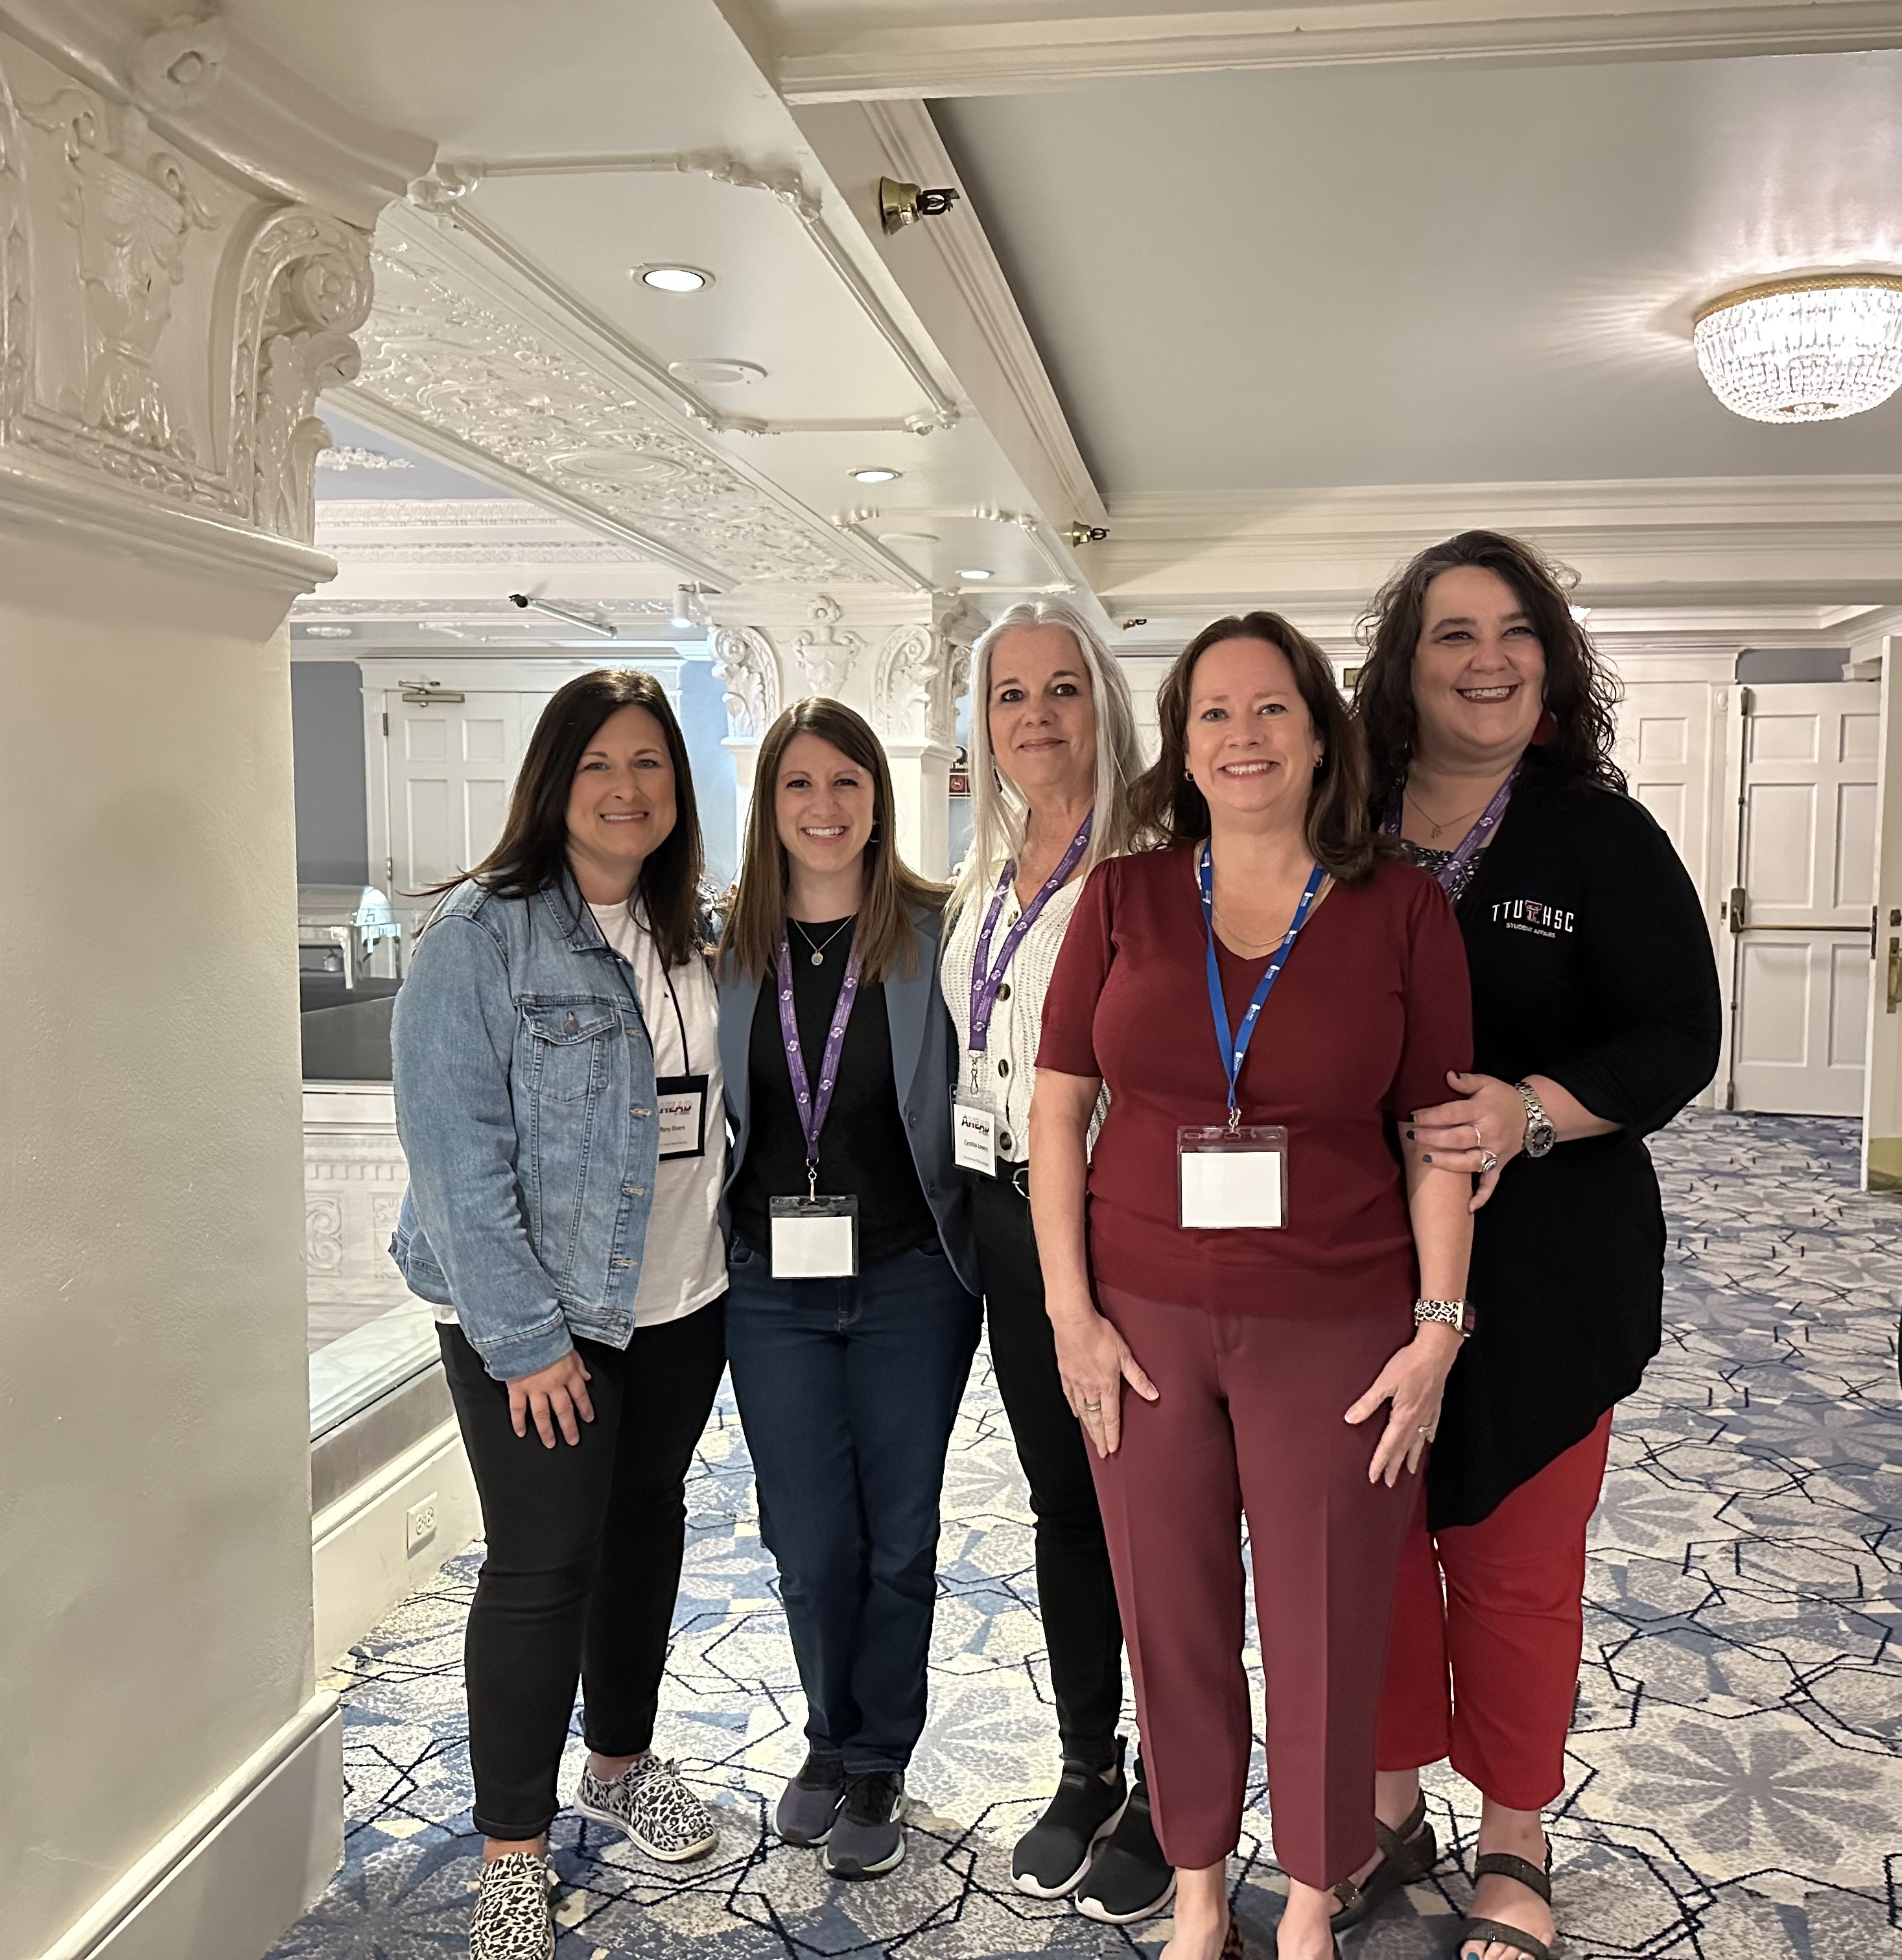 Photograph of 5 women that are the AHEAD in Texas Board of Directors Leadership- President Tamara Mancini, Past President Cindy Lowery, Treasurer Tiffany Rivers, Secretary Samantha Johnson, Director-at-Large Susan Denman-Briones, not pictured Director of Communication and Membership Laura Ramsey